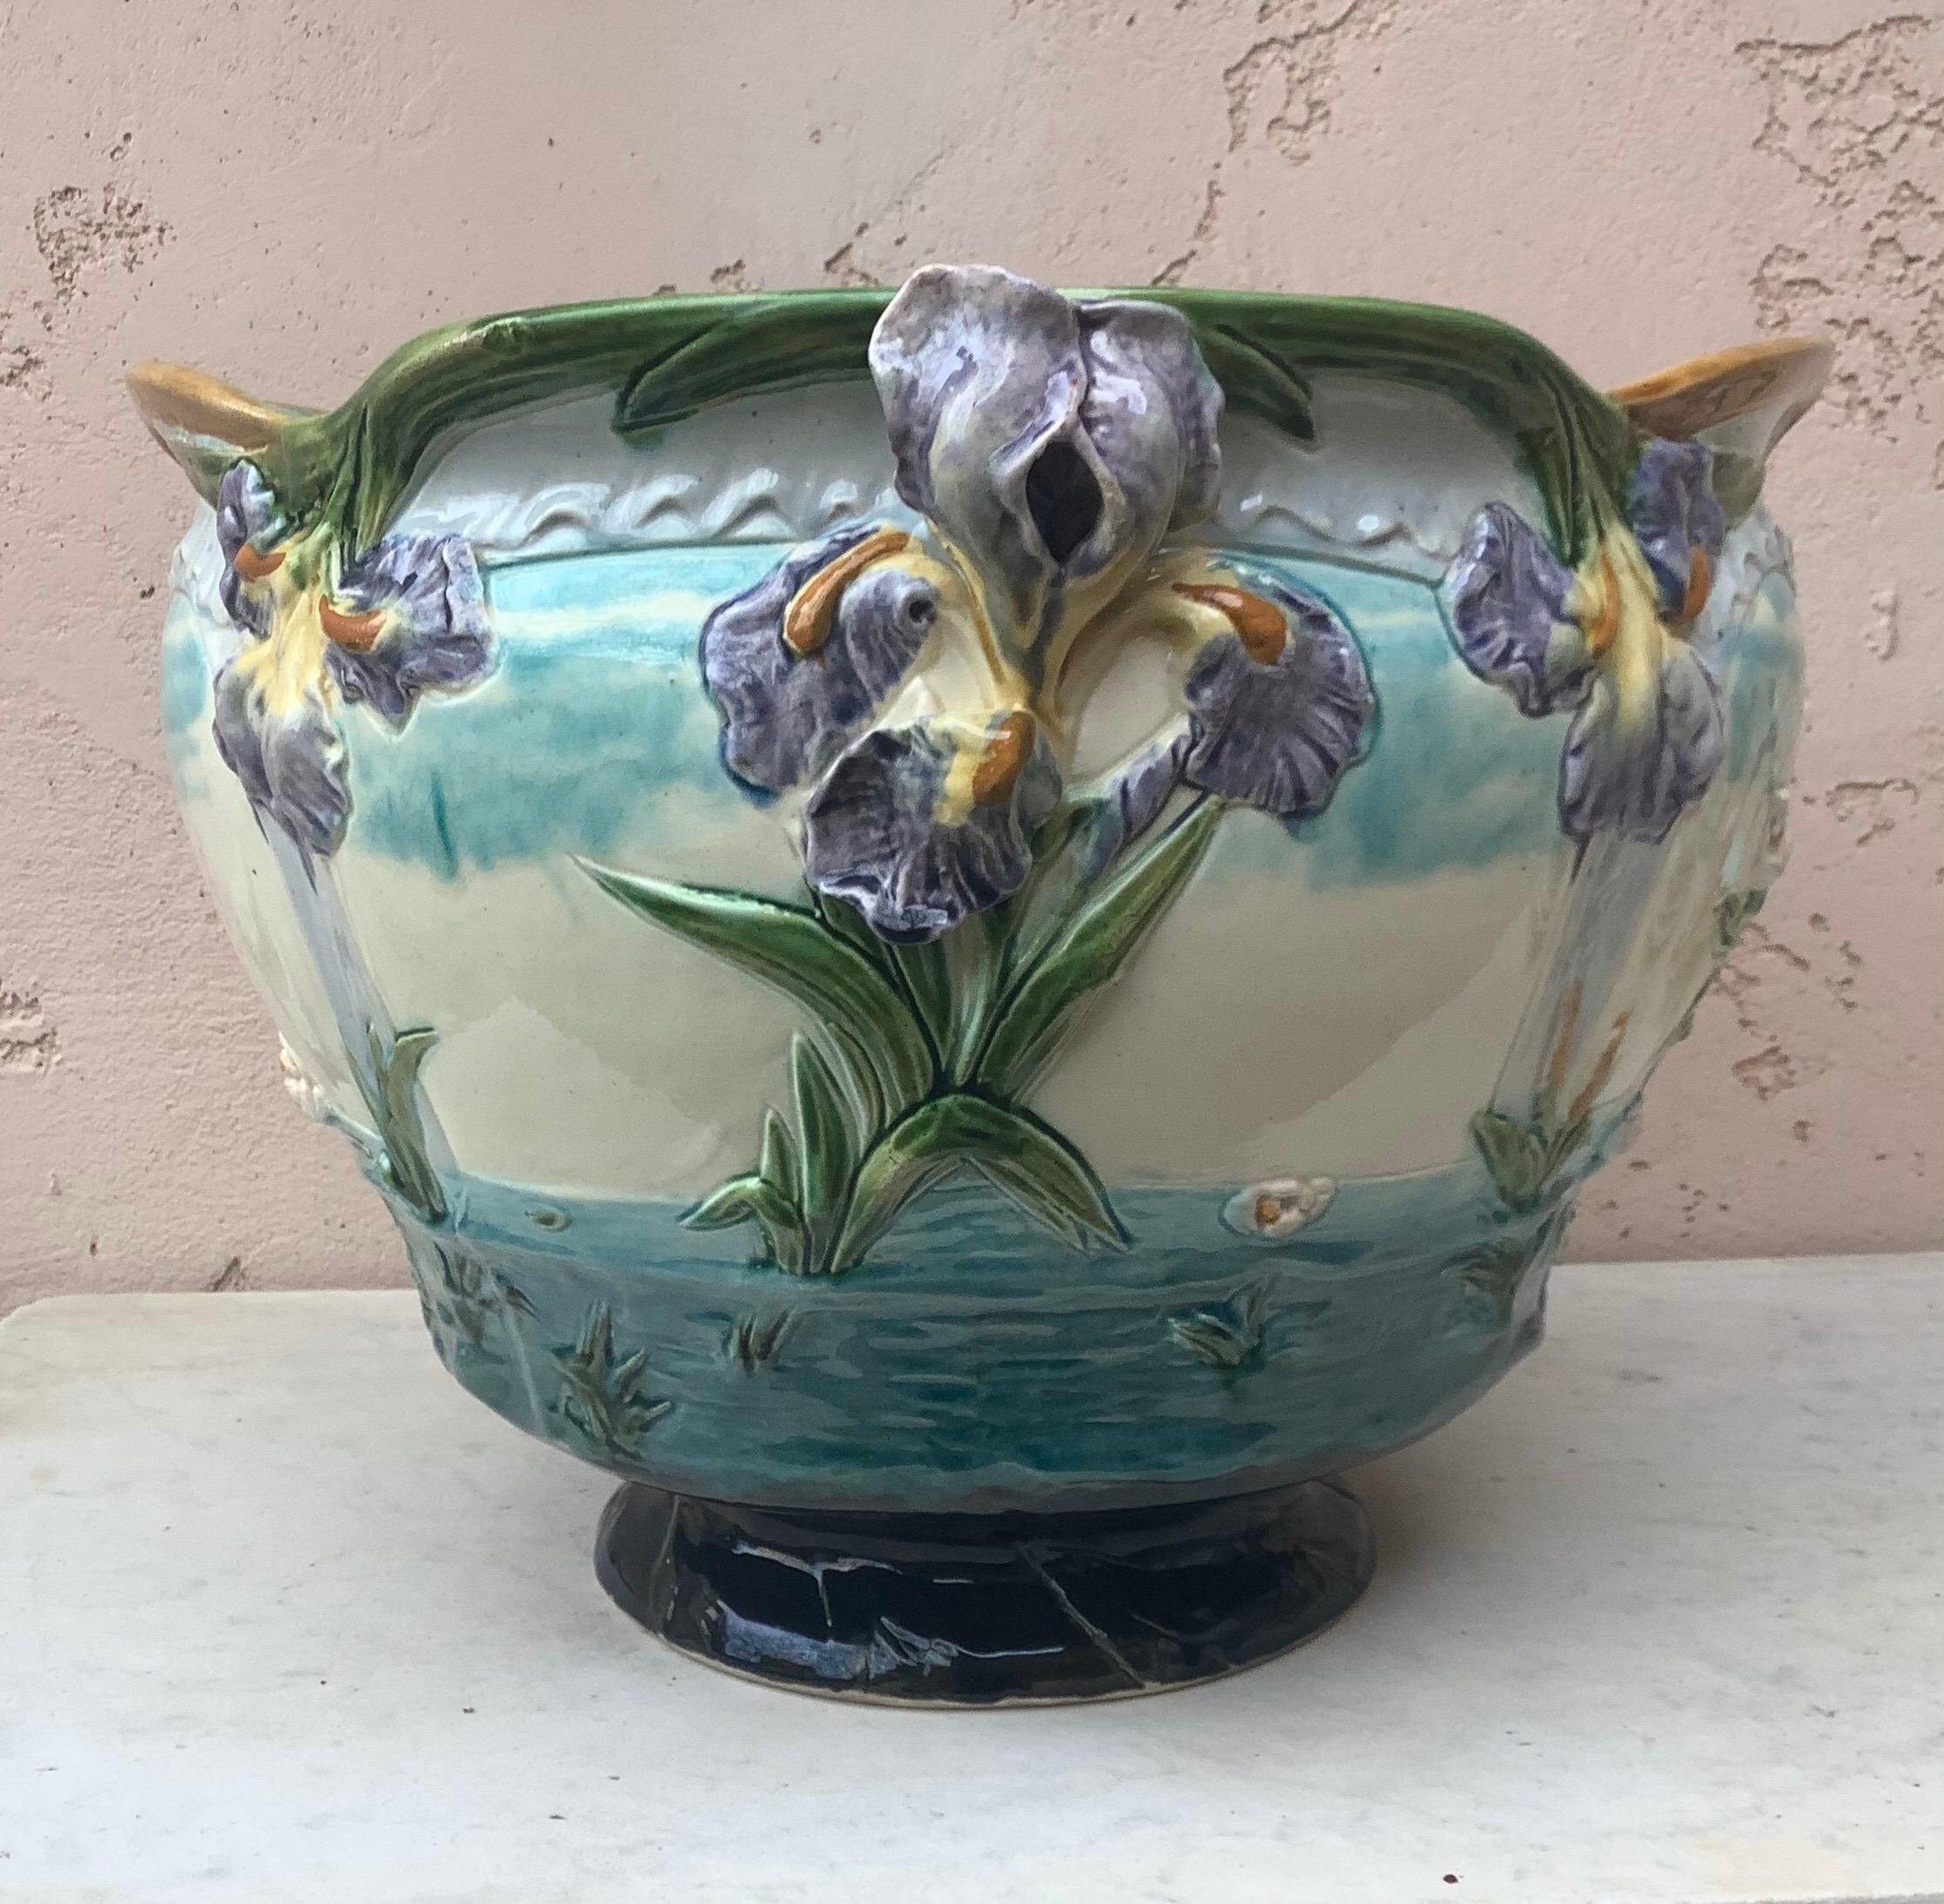 19th-Century monumental Majolica jardinière with Iris and aquatic plants attributed to Luneville.
This jardinière is inspired by the Art Nouveau and the Naturalism movement of the end of 19th century.